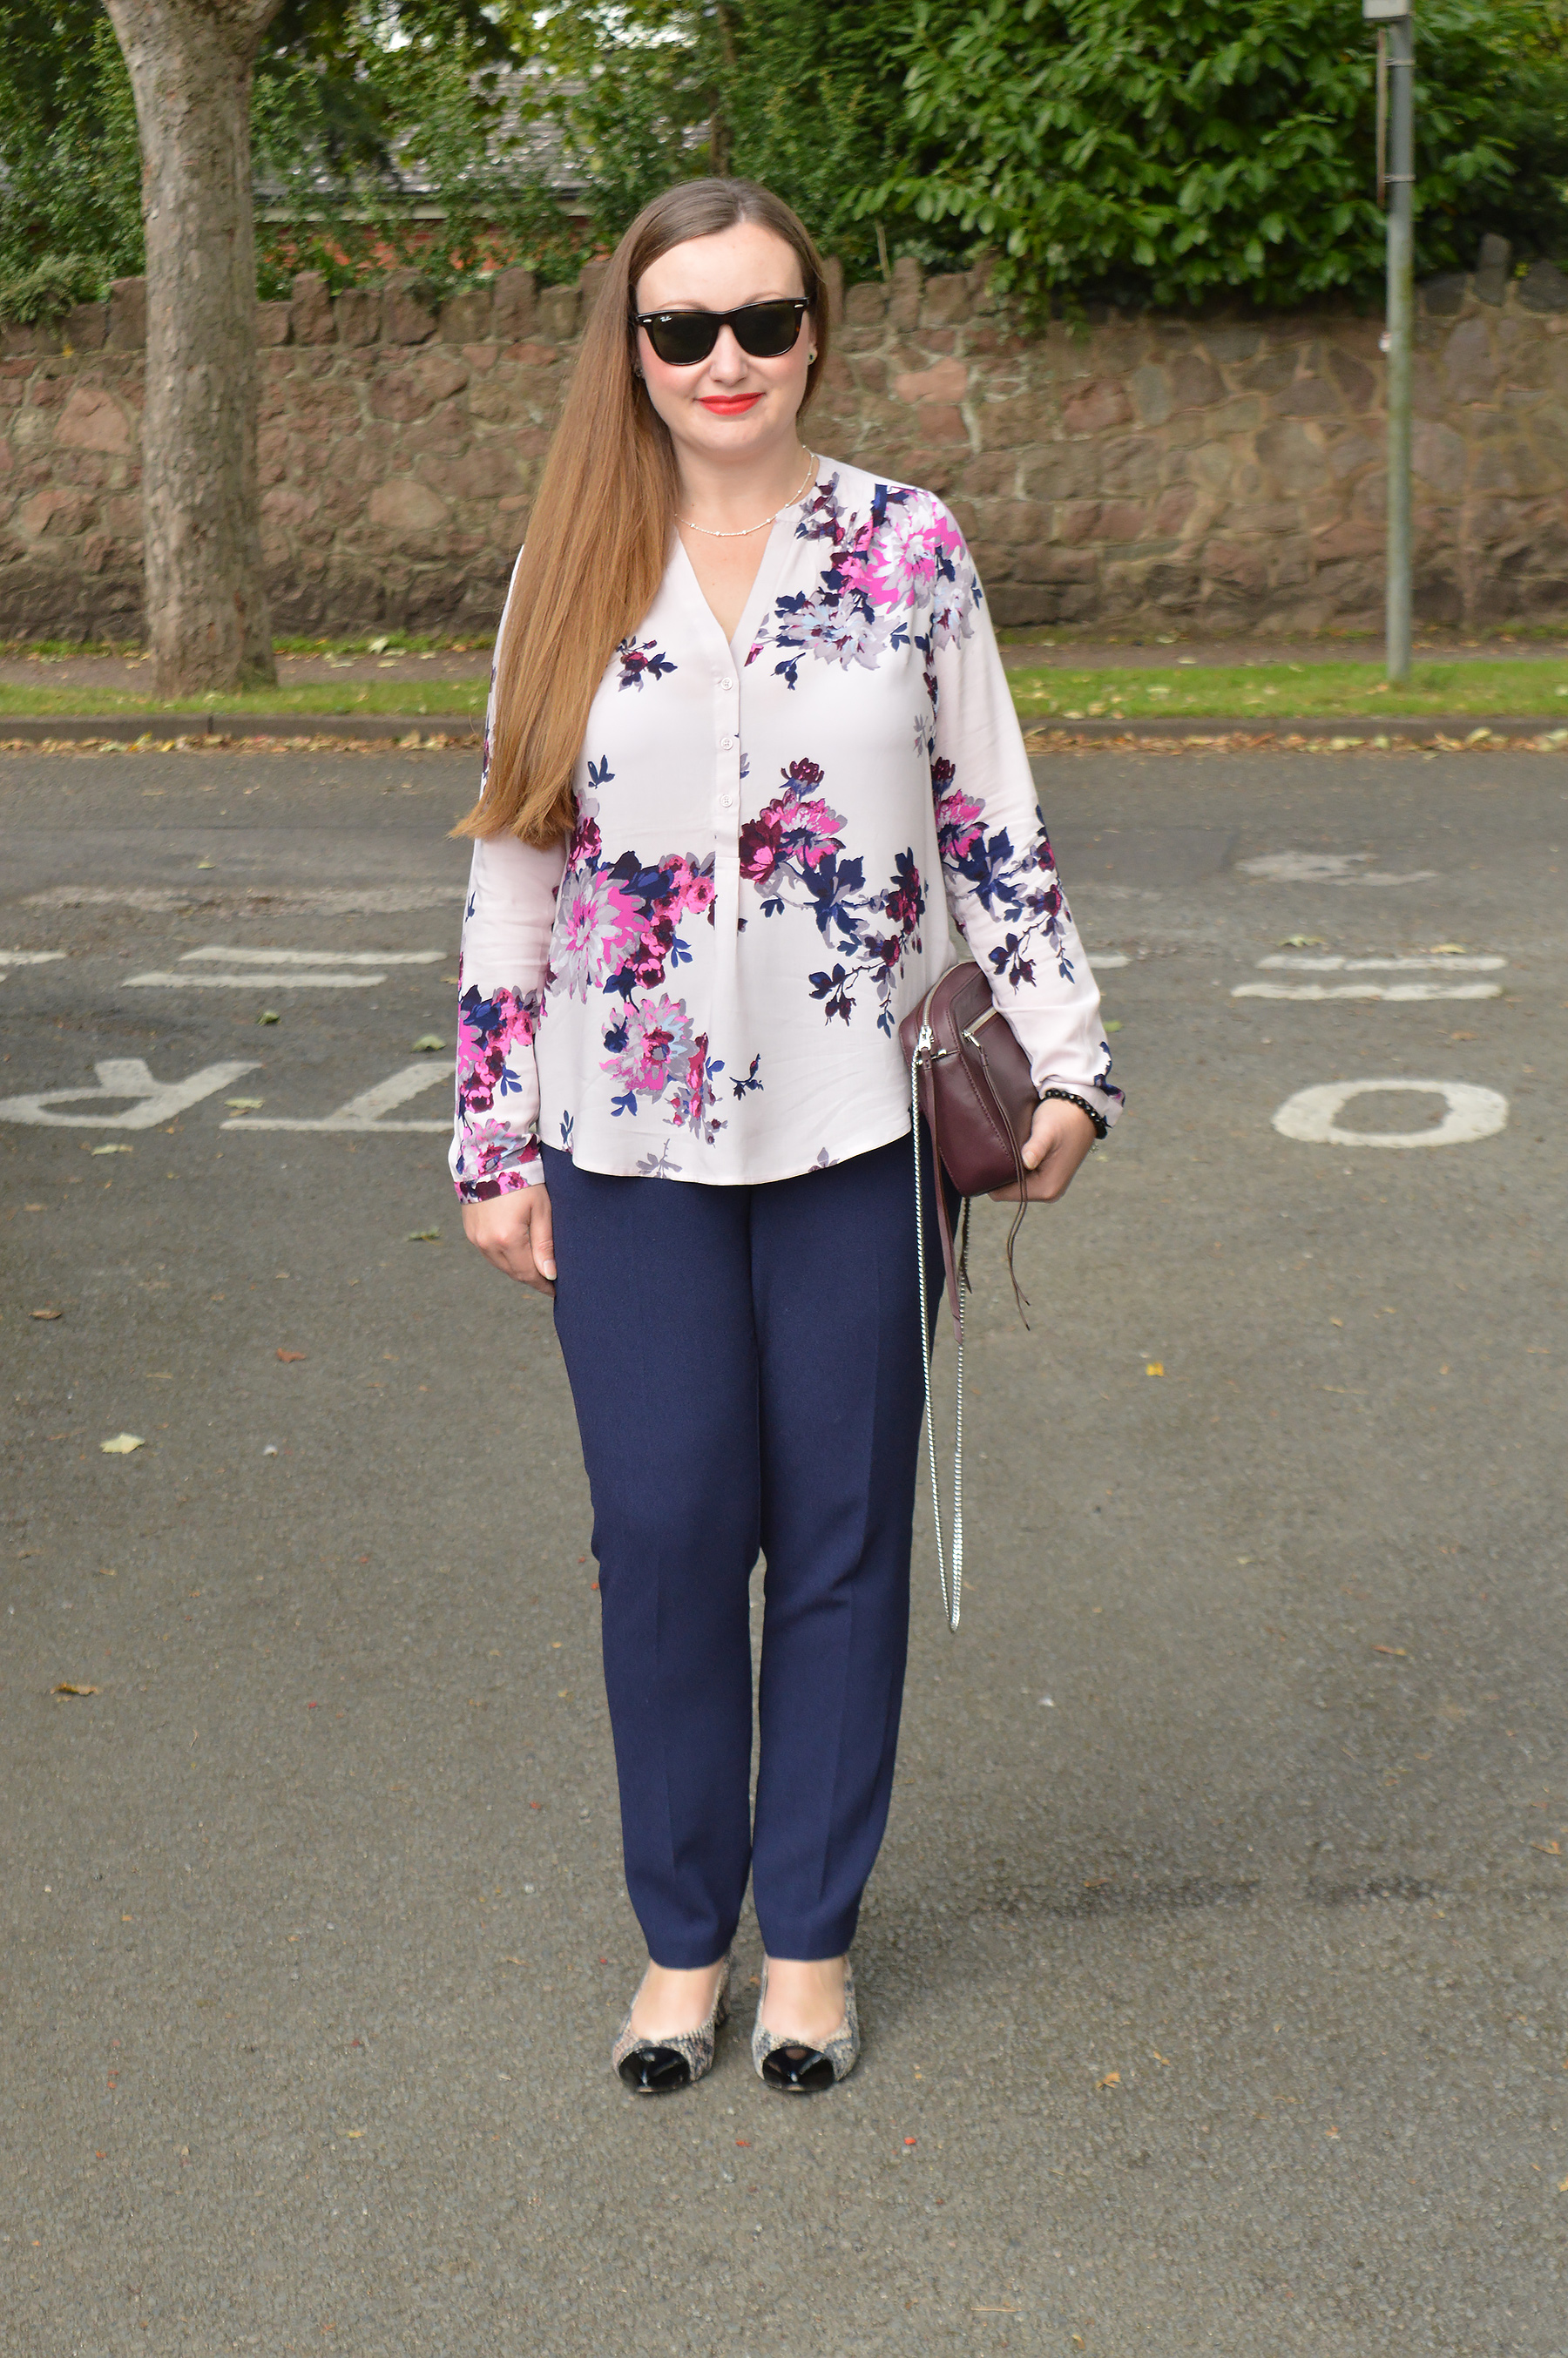 Joules Rosamund Pop Over Blouse Outfit – JacquardFlower